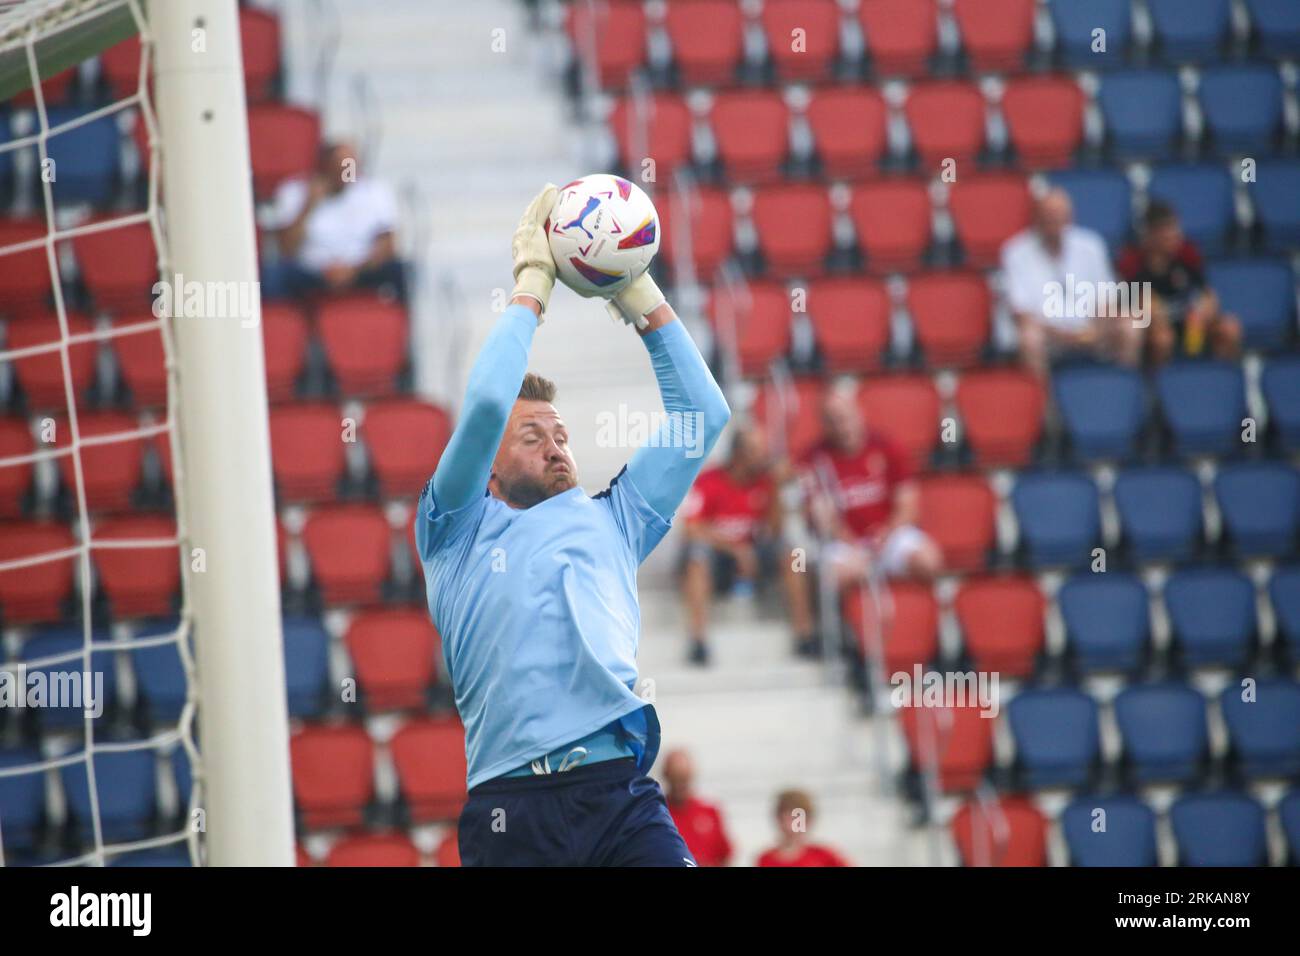 Pamplona, Spain, 24th August, 2023: Club Brugge's goalkeeper, Simon Mignolet in the warm-up during the first leg of the previous round of the UEFA Europa Conference League 2023-24 between CA Osasuna and Club Brugge at the Estadio de El Sadar, in Pamplona, on August 24, 2023. Credit: Alberto Brevers / Alamy Live News. Stock Photo